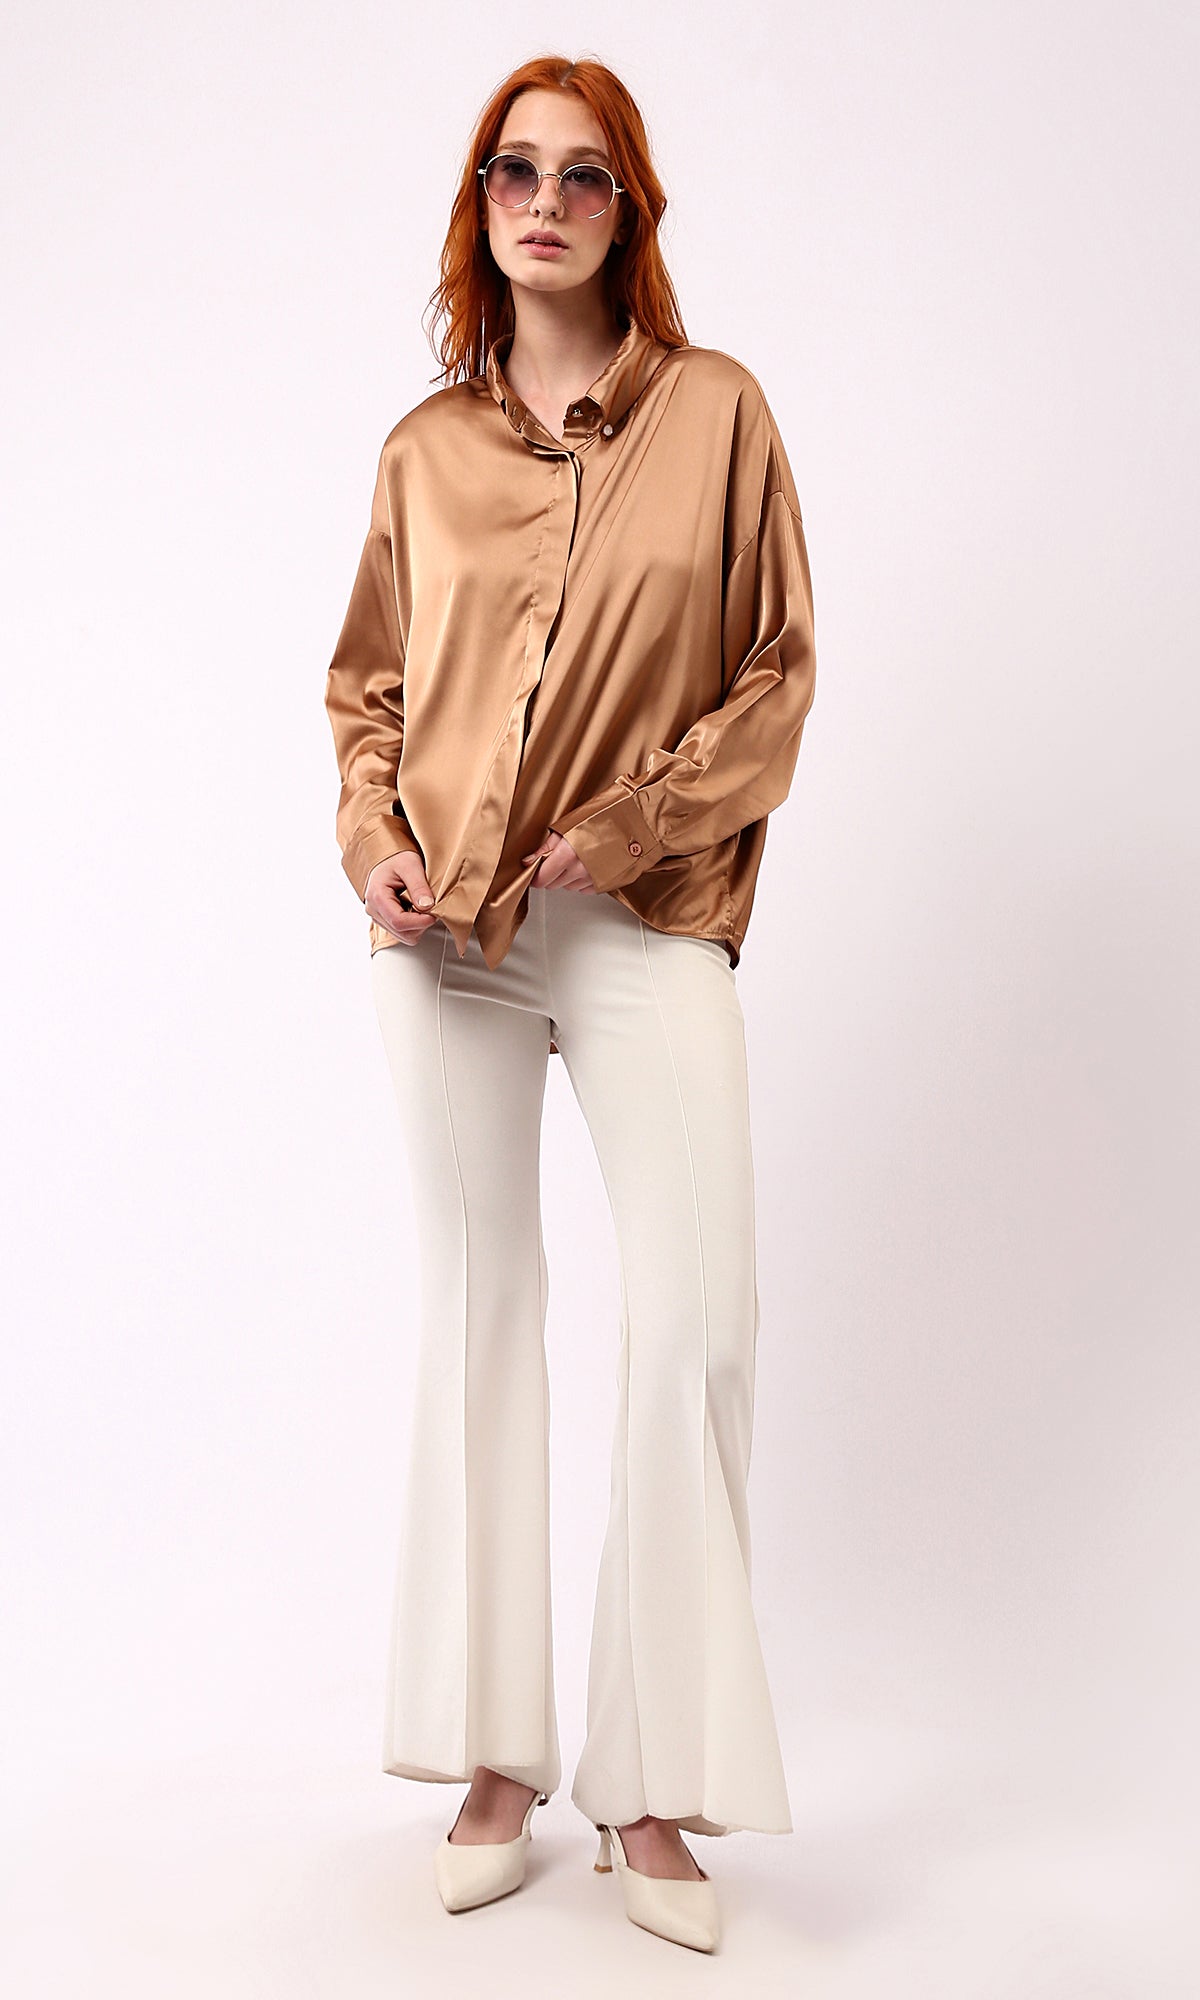 O181651 Shiny Copper Long Sleeves Solid Evening Shirt